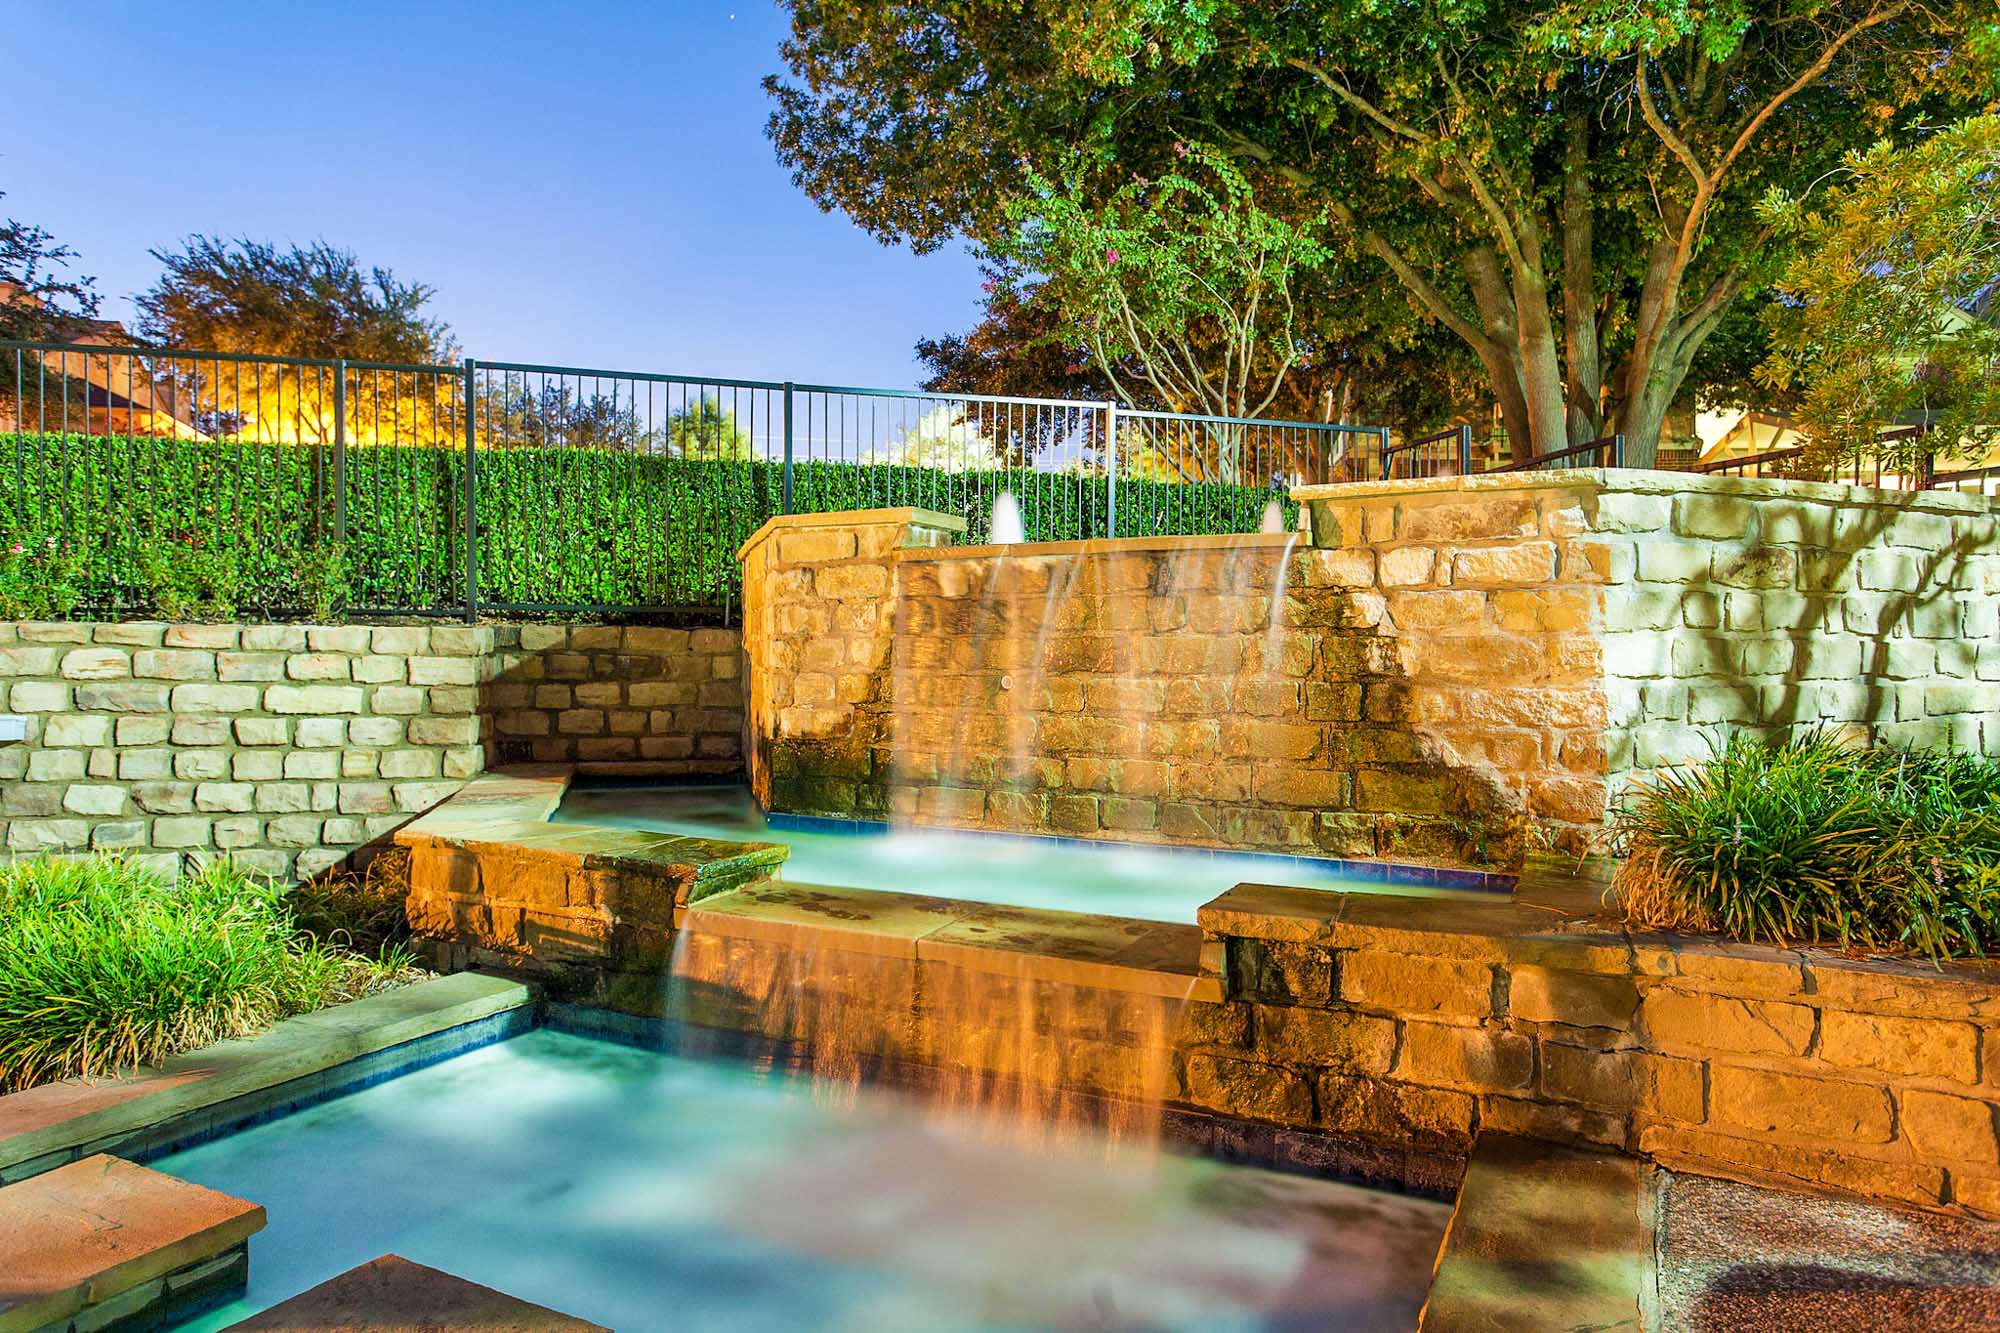 The hot tub at The Gables of McKinney apartments near Dallas, Texas.